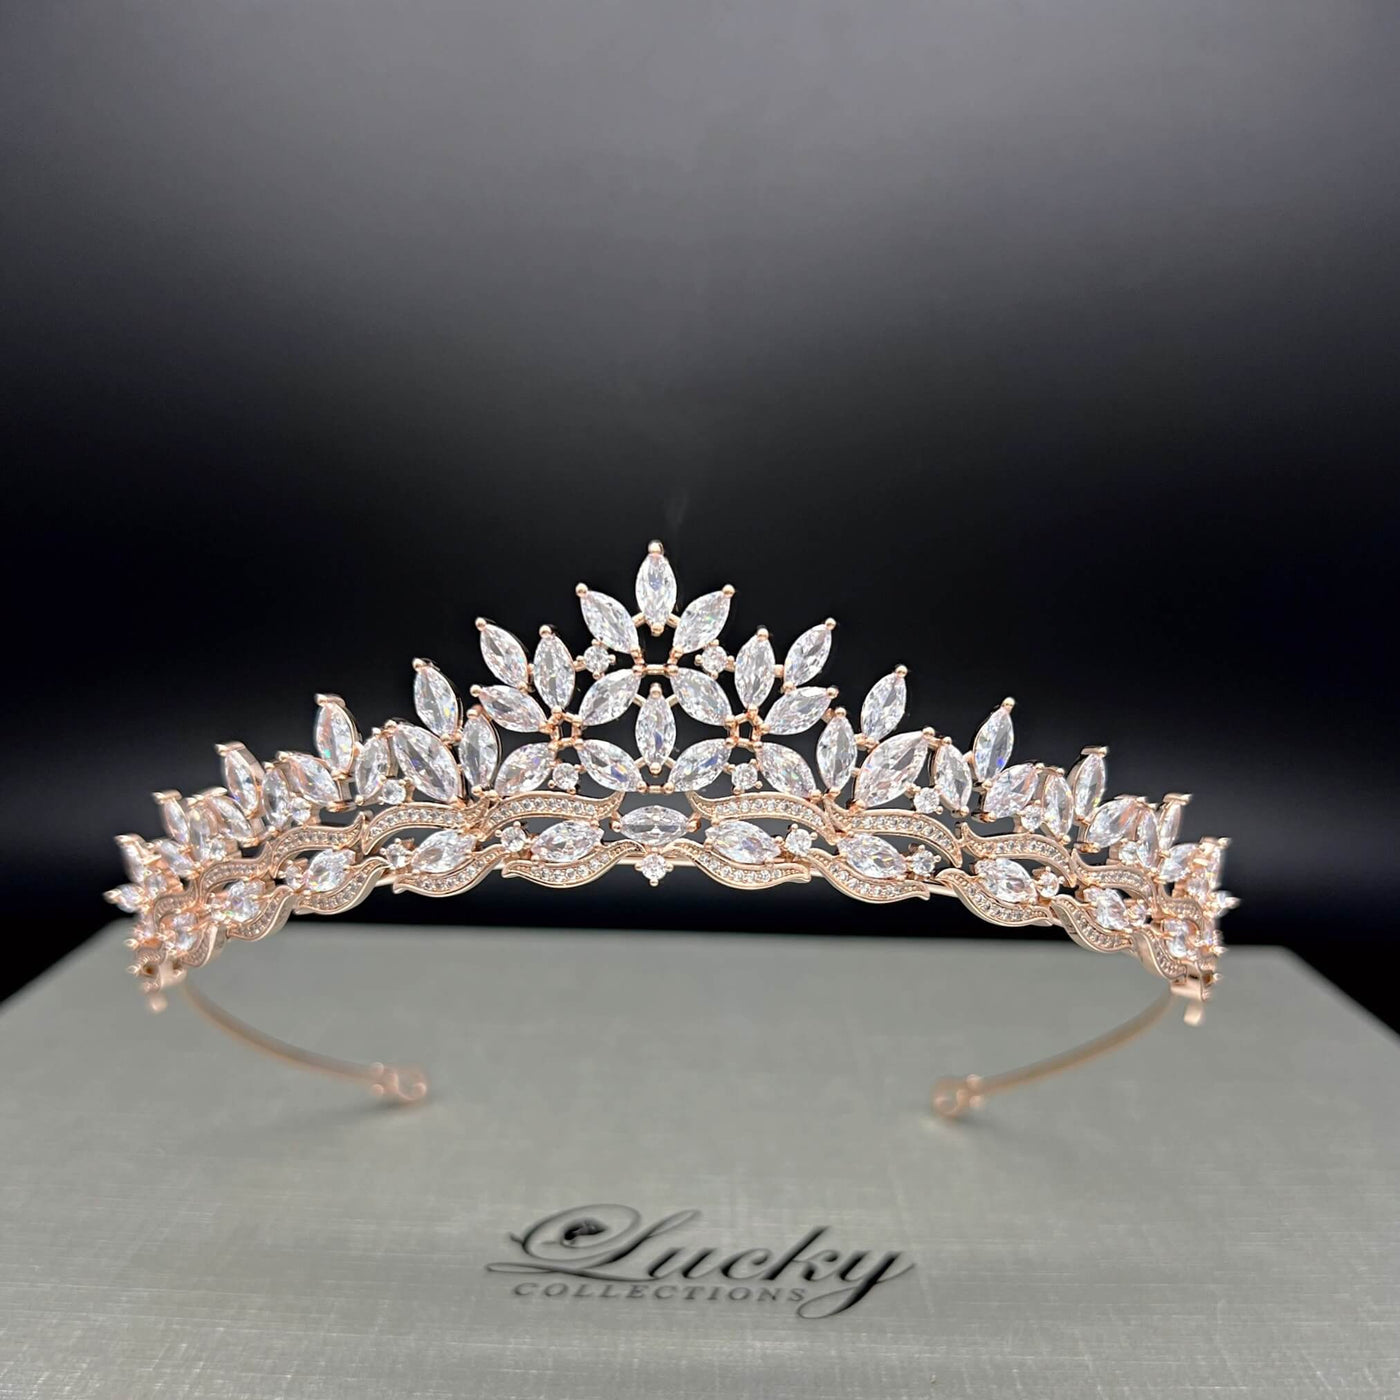 Rosegold Small Tiara for a Refined Look, Zirconia Crown for Bride, Quince Corona